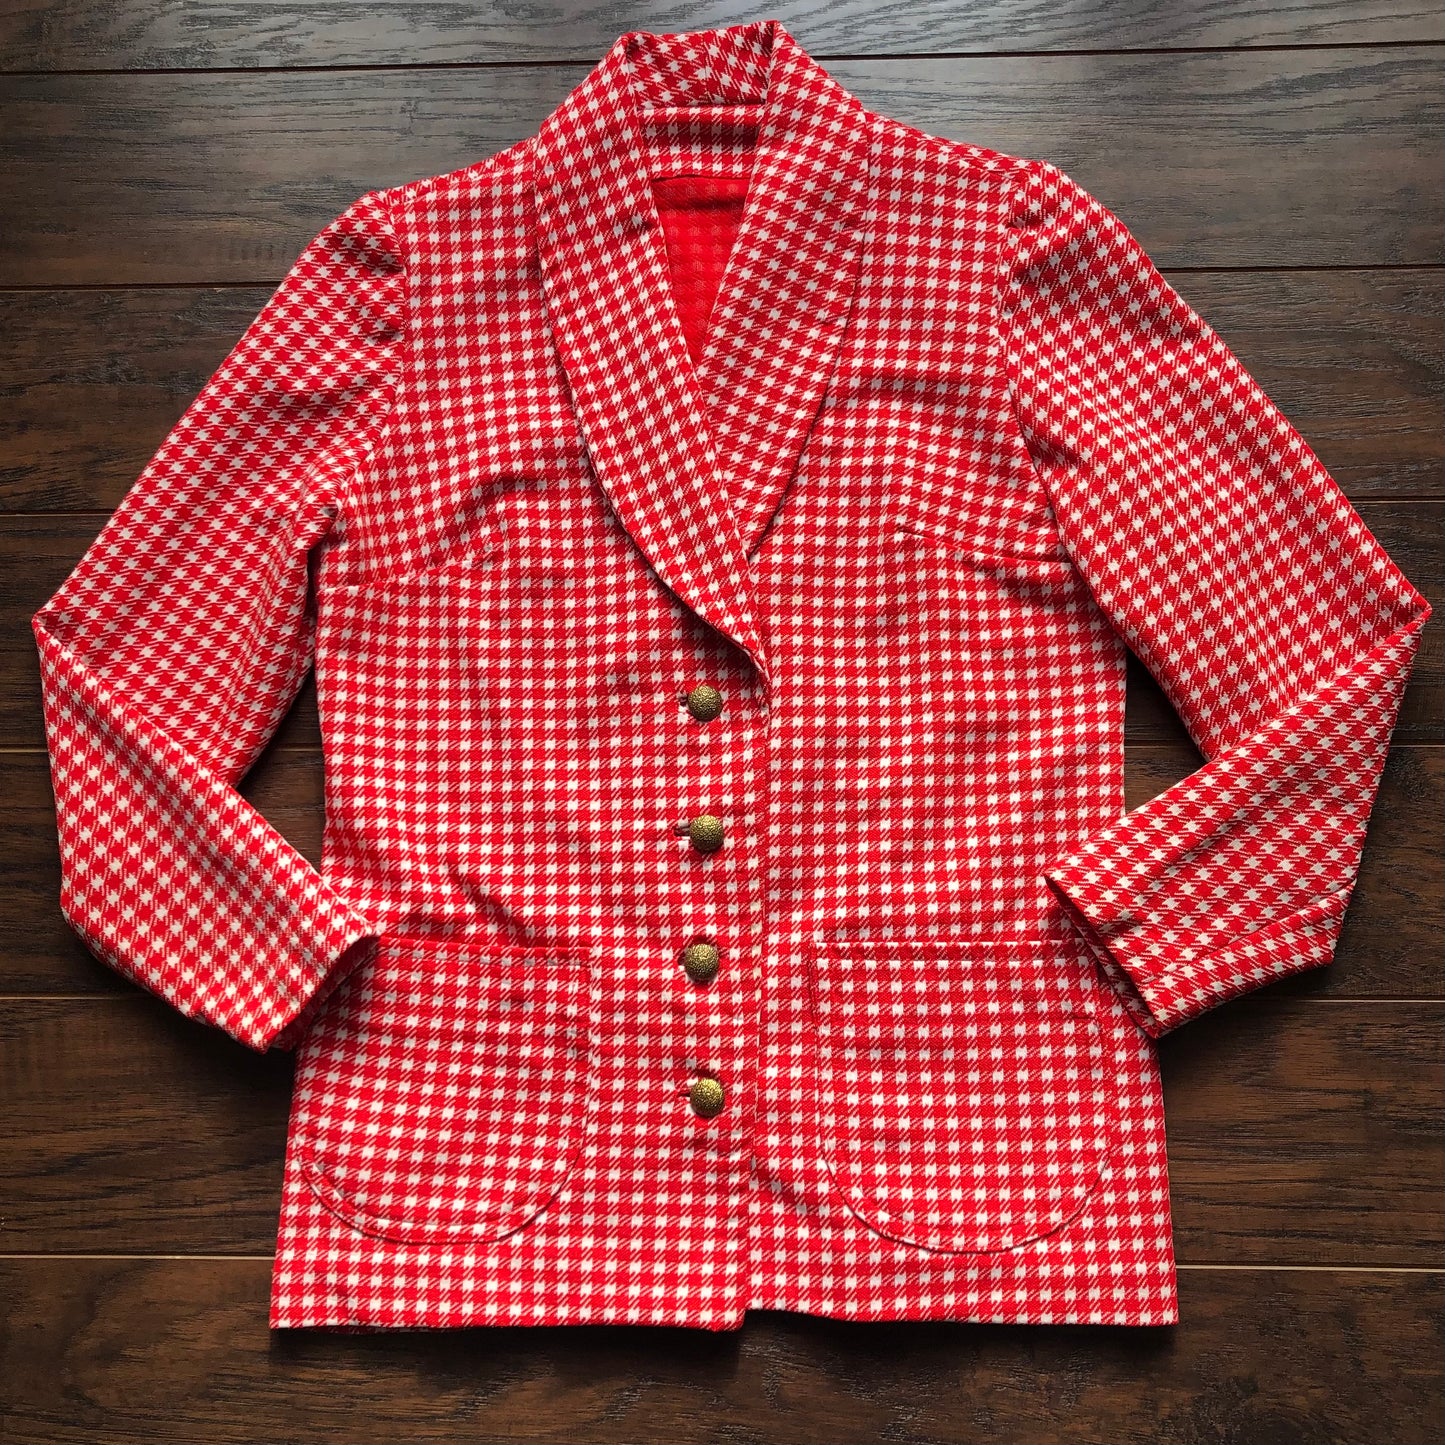 Vintage Homemade Women's Houndstooth Pattern Blazer with Gold Buttons